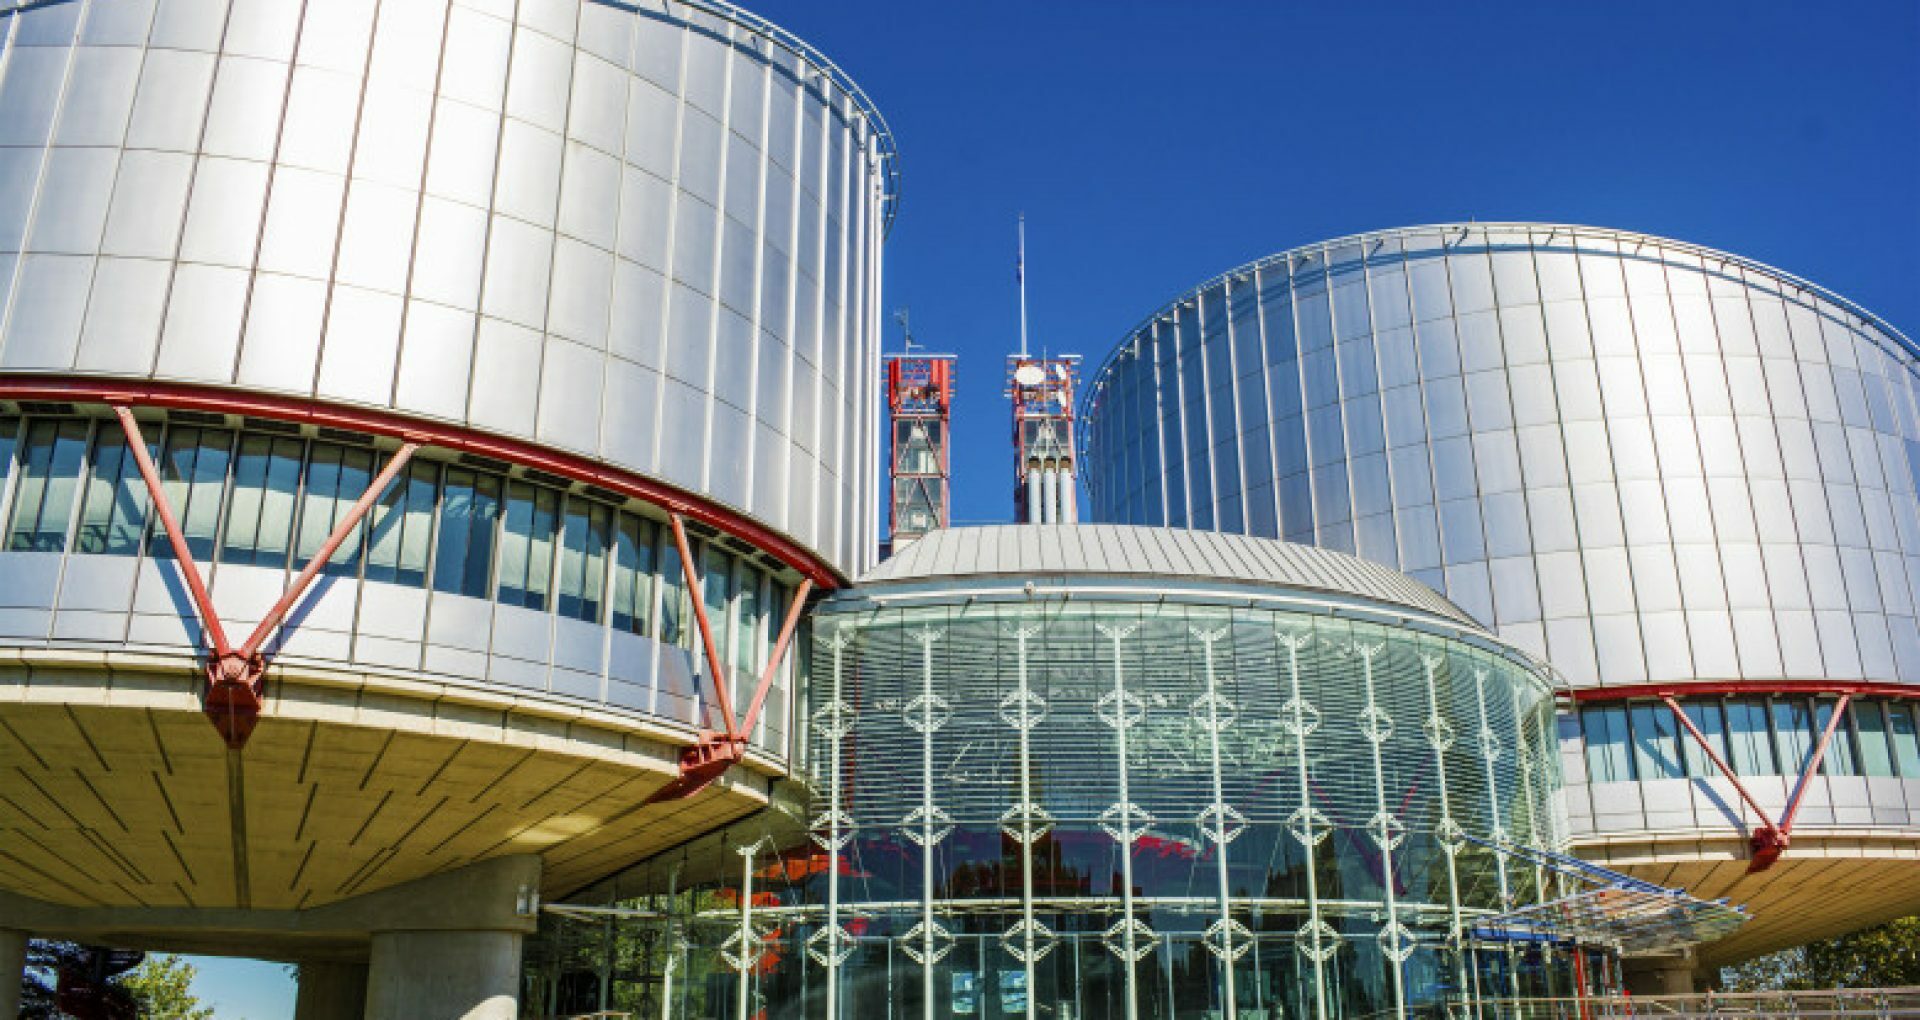 Moldova Convicted at ECtHR: The State Is to Pay 67,750 Euros for Moral Damages